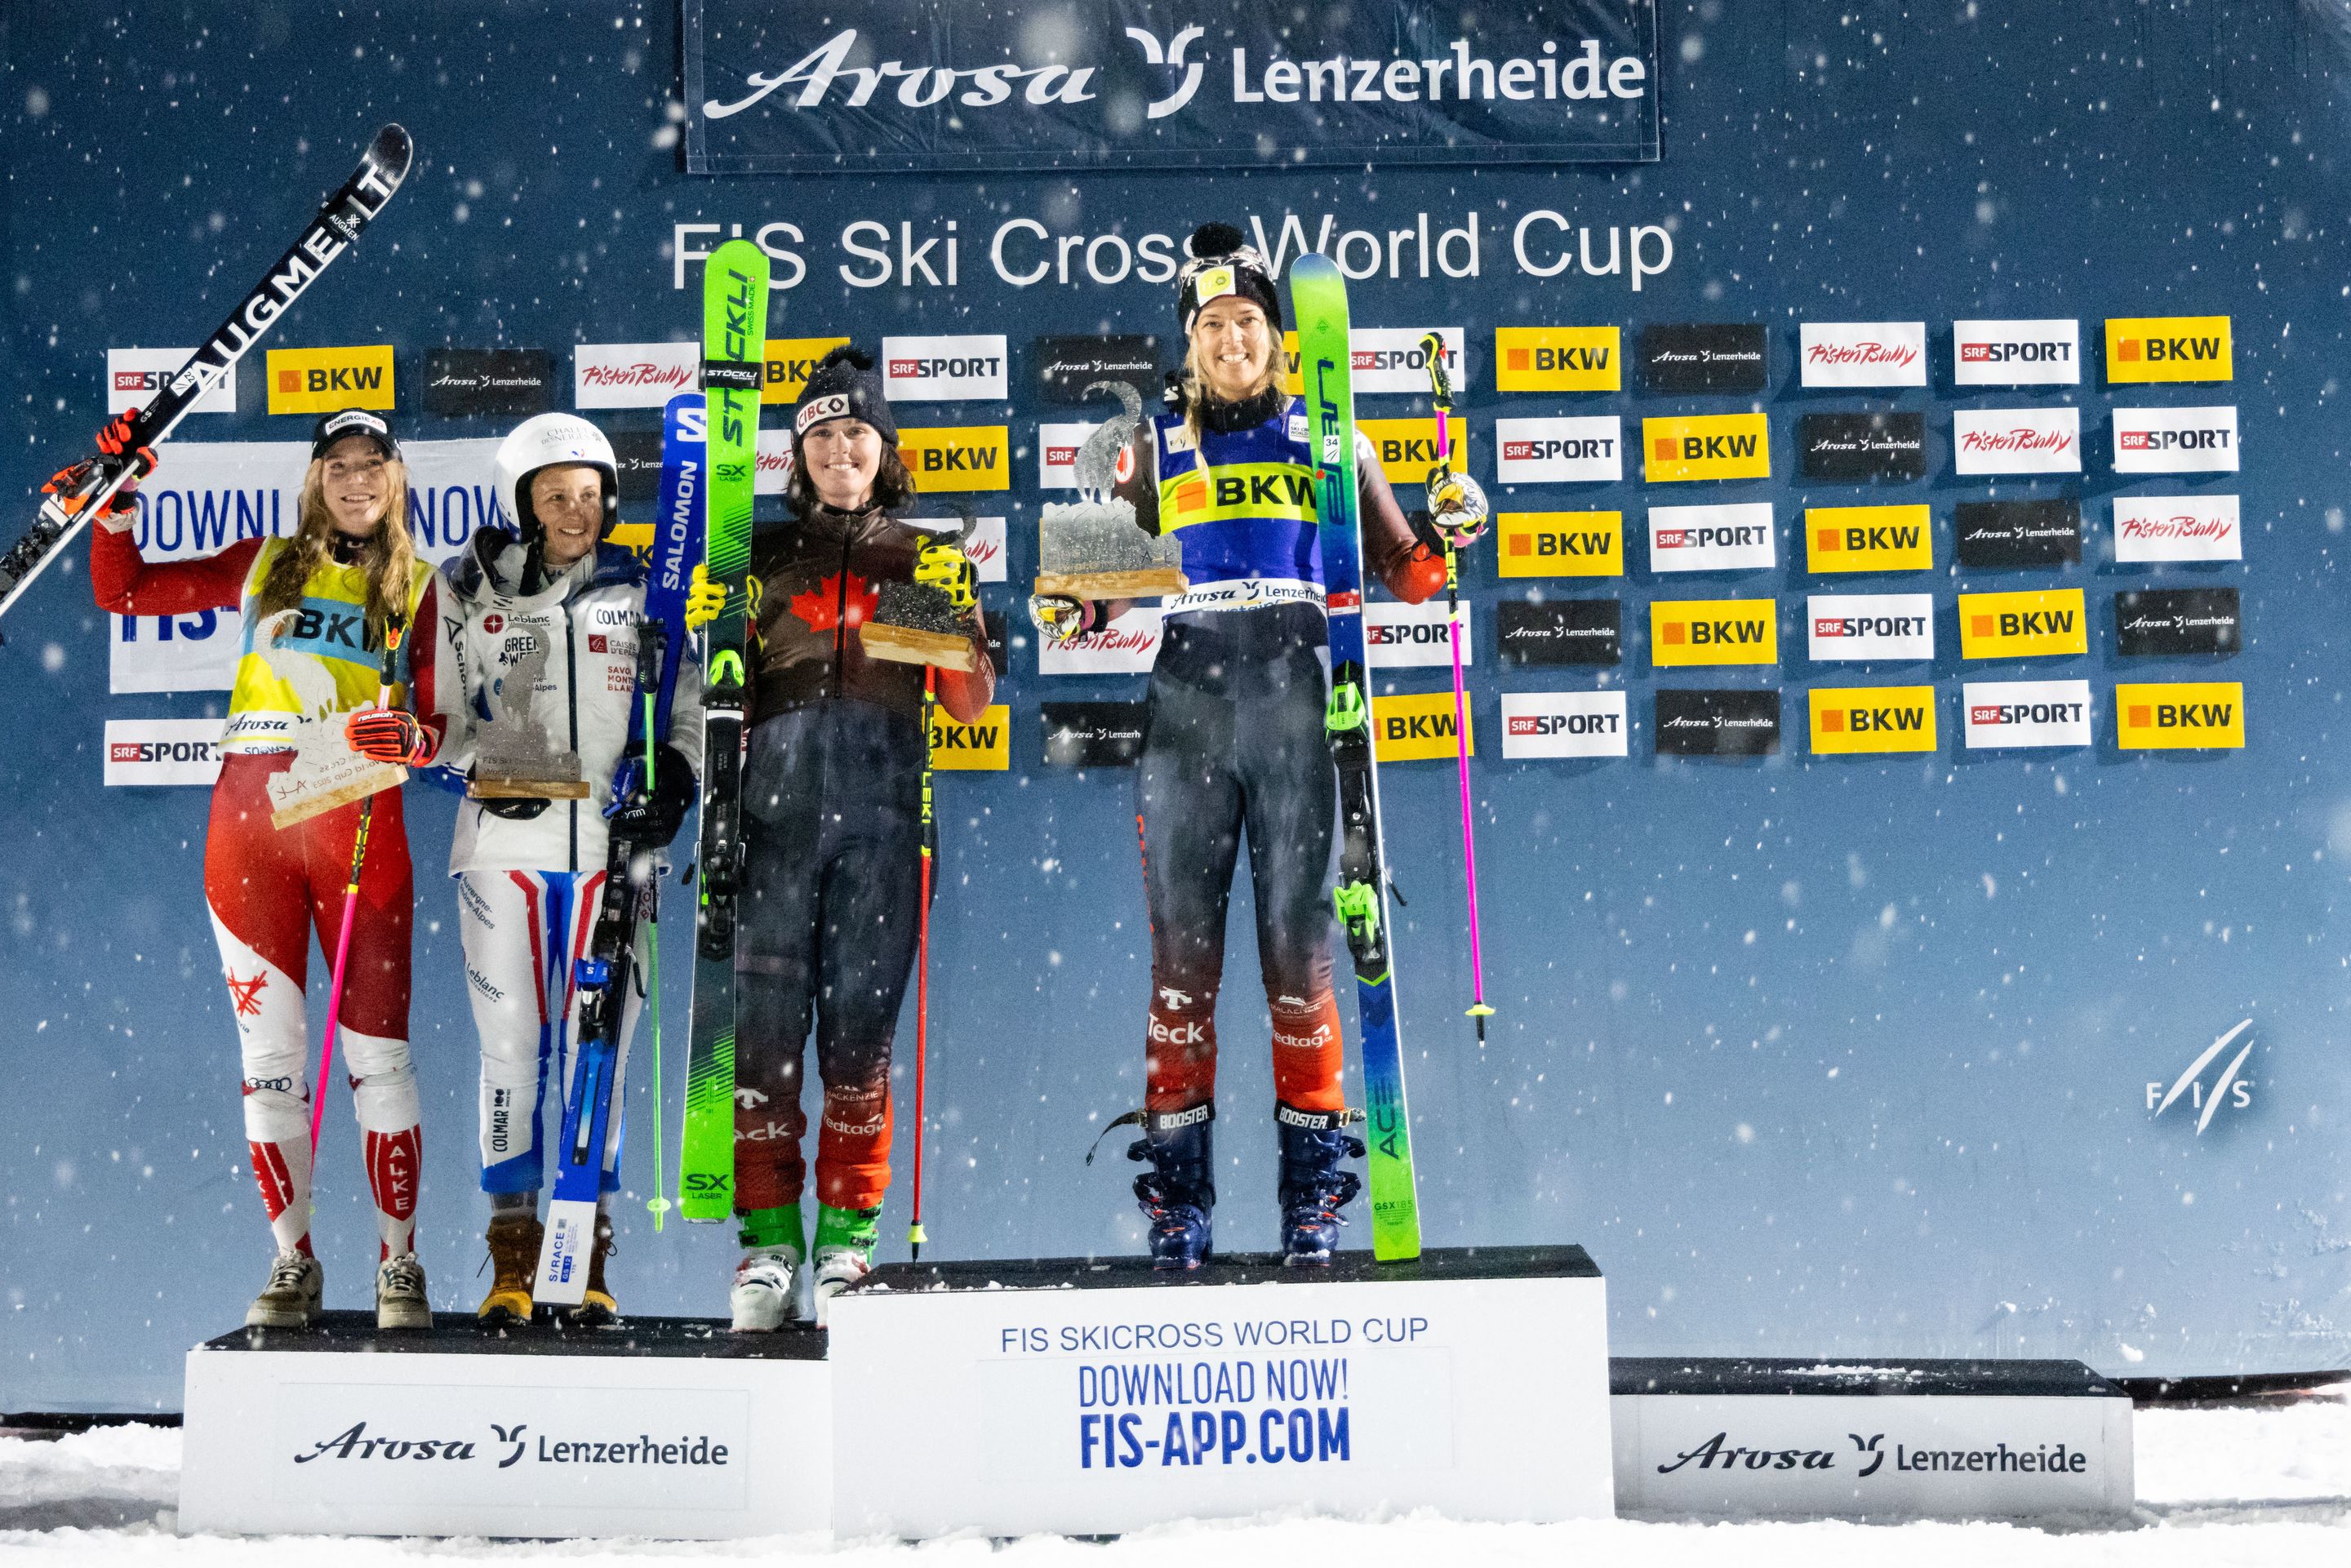 Second place was occupied by three athletes in the women's race at Arosa